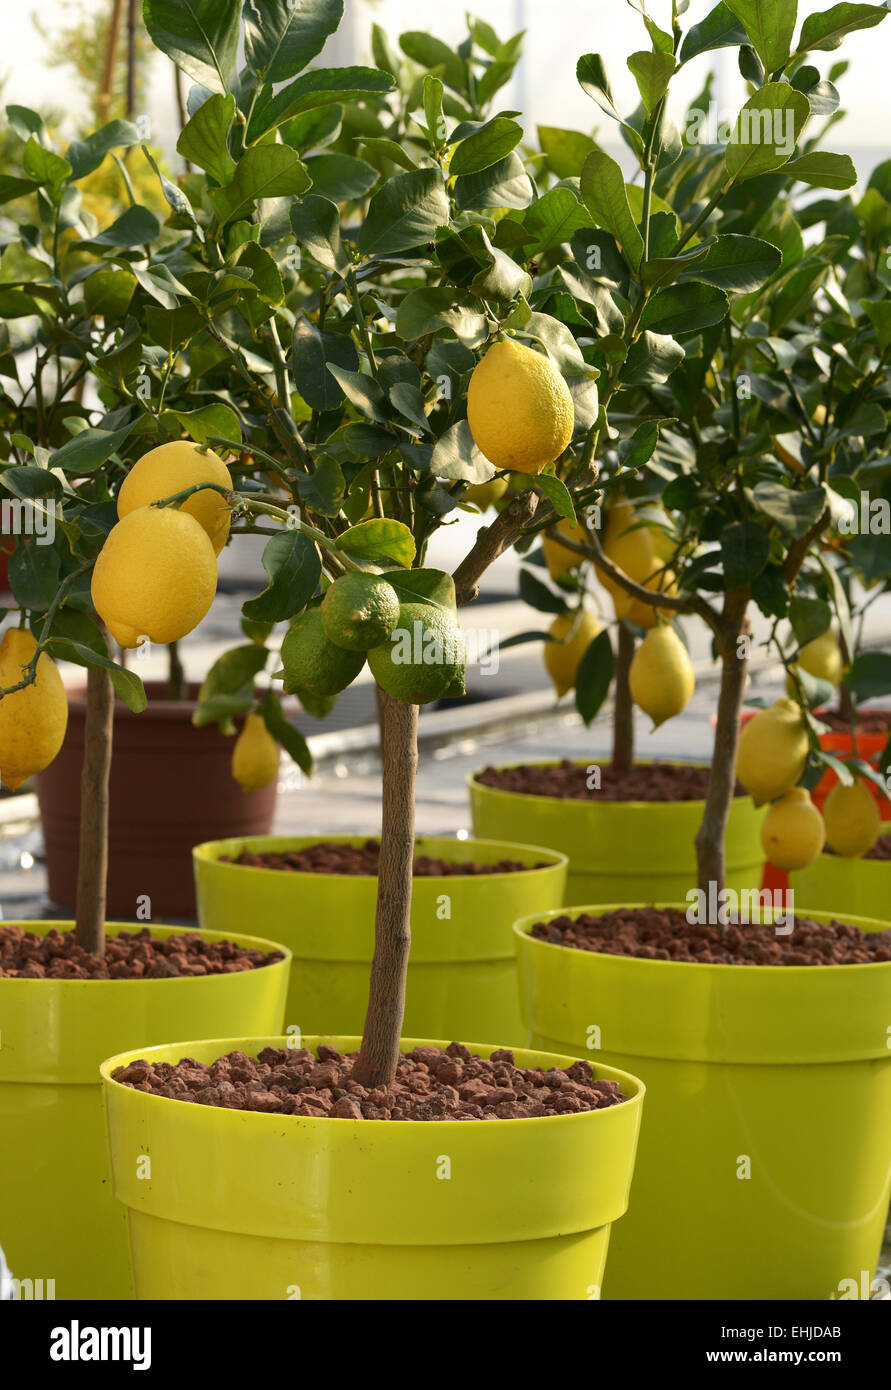 Close up Plenty of Small Lemon Trees with Yellow and Green Fruits Growing on Yellow Pots. Stock Photo